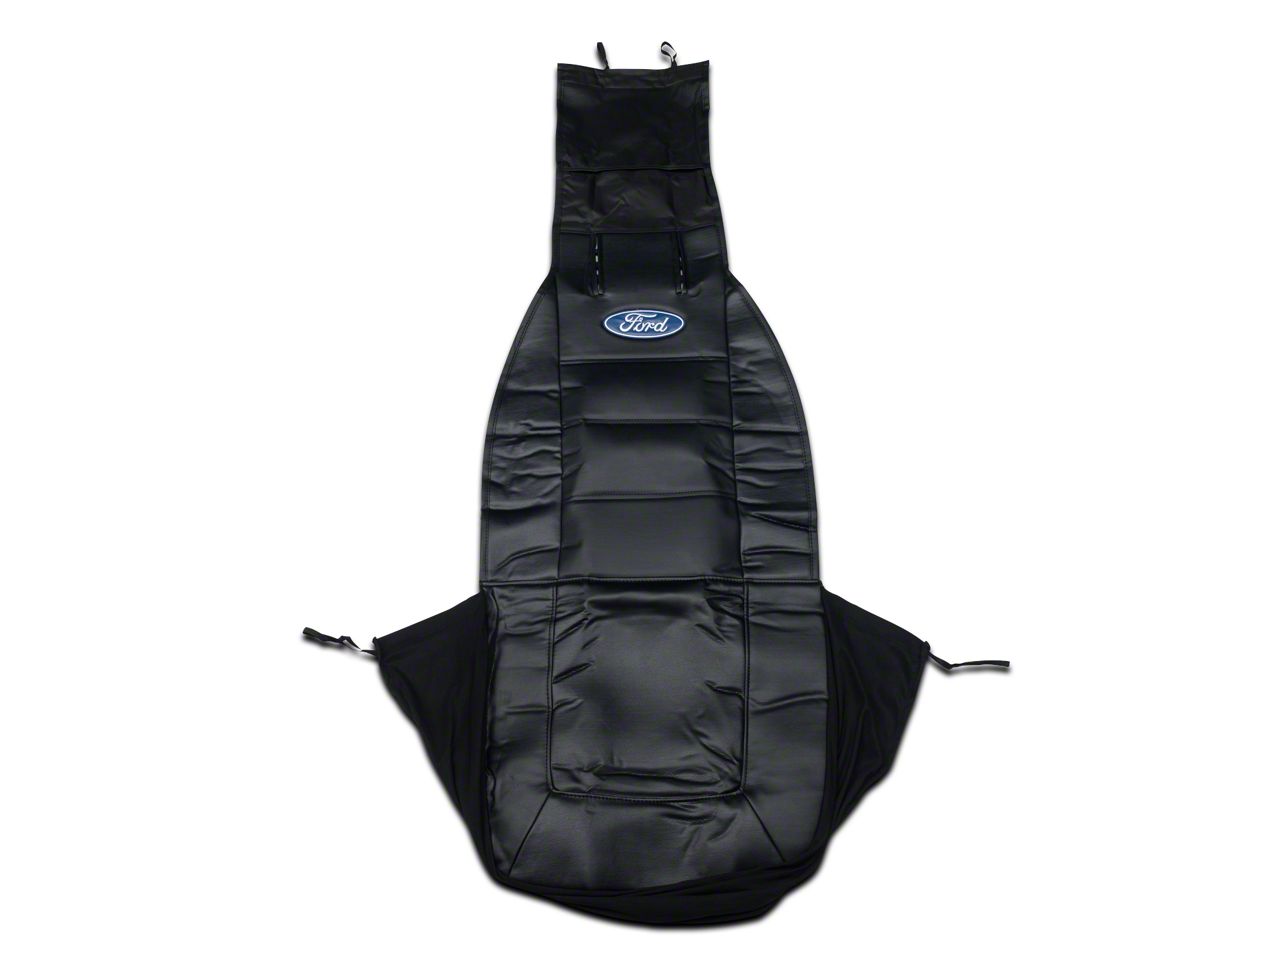 Ford sideless seat cover #4